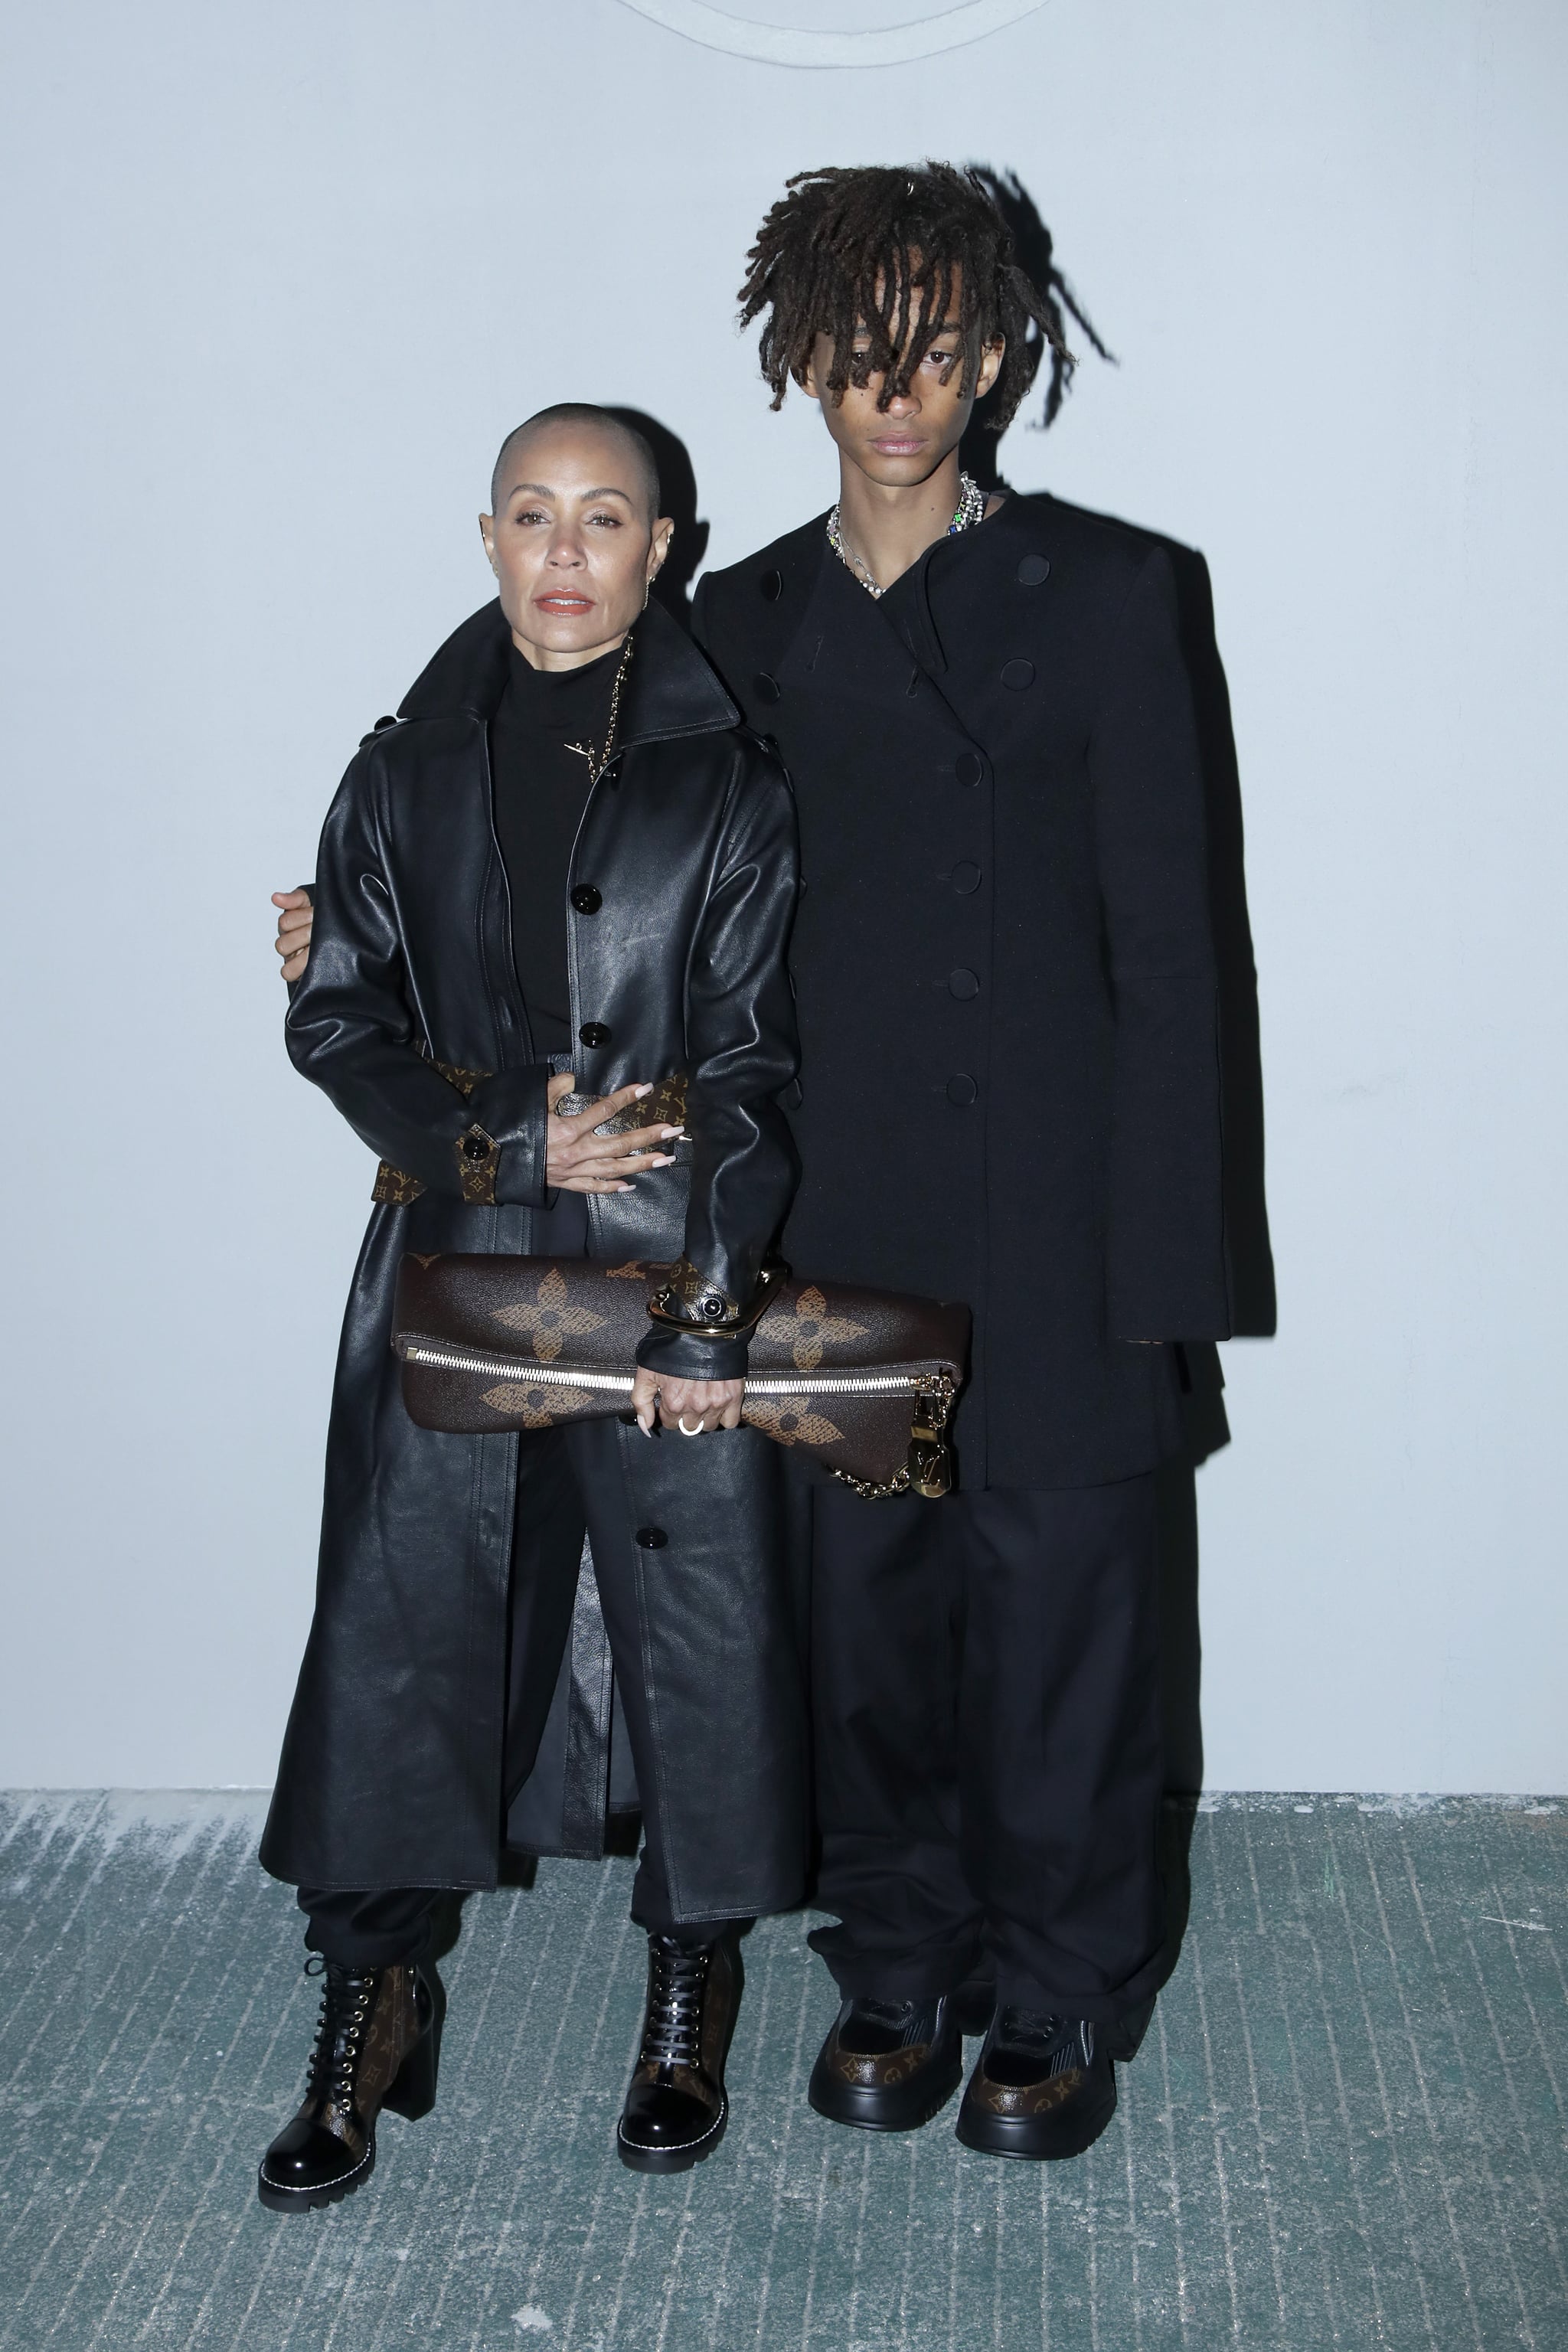 SEOUL, SOUTH KOREA - APRIL 29: (L-R) Jada Pinkett Smith and Jaden Smith attend the Louis Vuitton Pre-Fall 2023 Show on the Jamsugyo Bridge at the Hangang River on April 29, 2023 in Seoul, South Korea. (Photo by Han Myung-Gu/Getty Images)